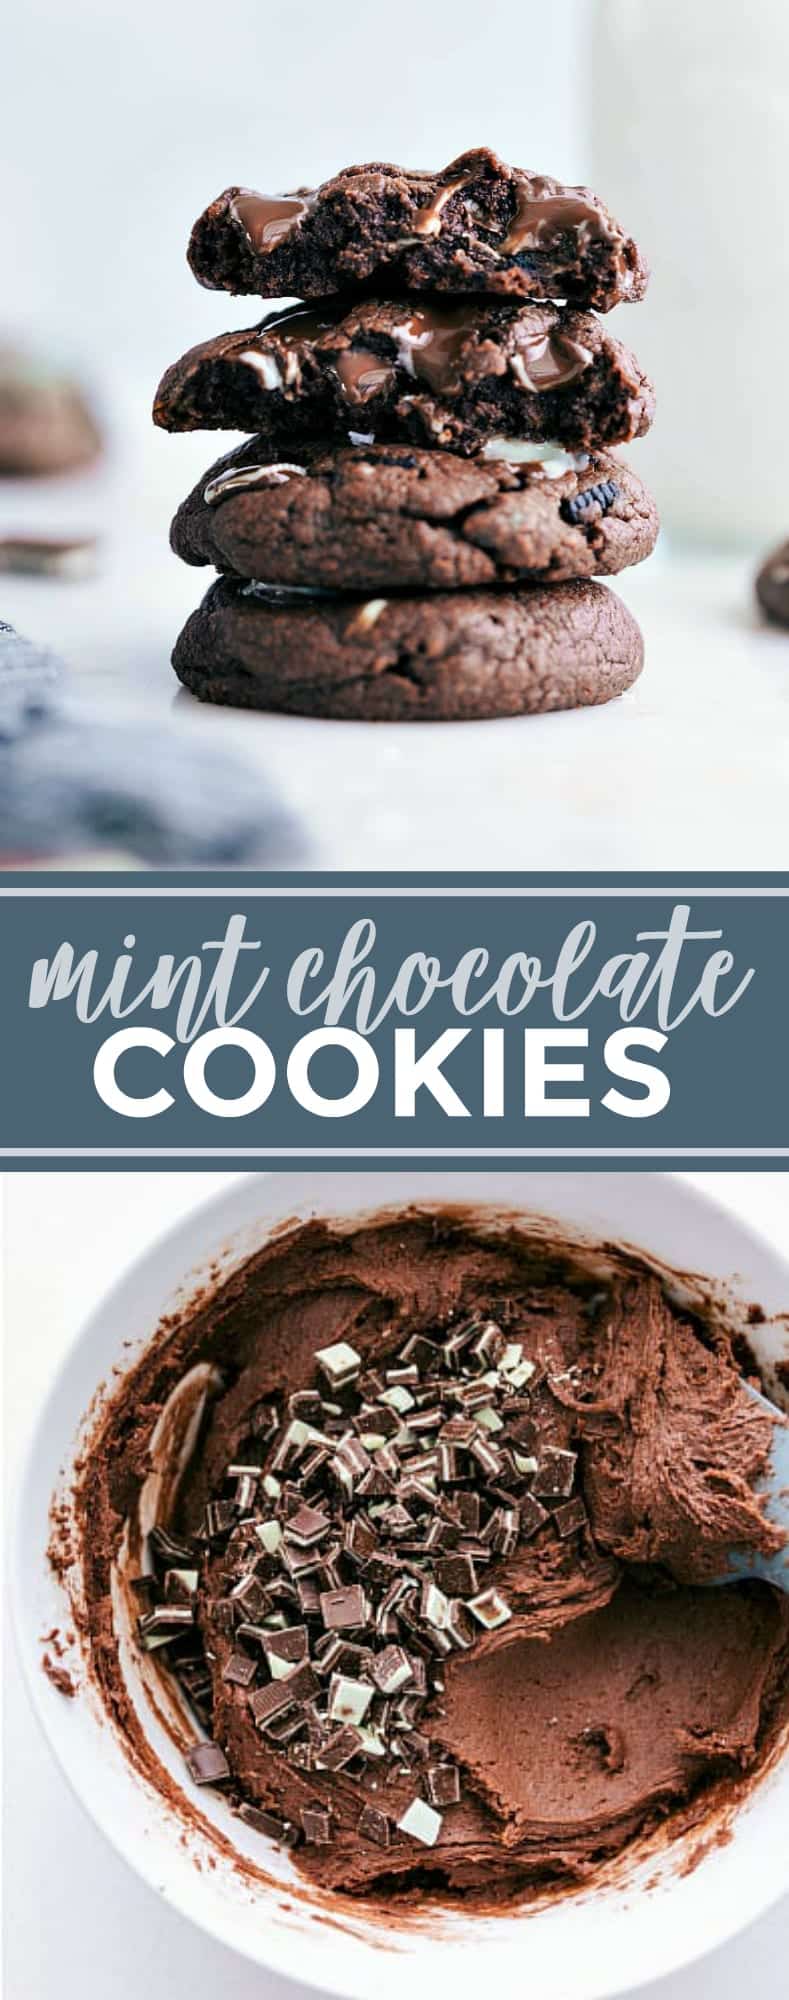 Everyone BEGS for the recipe for these mint chocolate chip cookies! They're bursting with flavor and so simple to make thanks to a couple of shortcuts! via chelseasmessyapron.com #cookie #mint #andes #chocolate #chip #dessert #holiday #easy #brownie #mix #shortcut